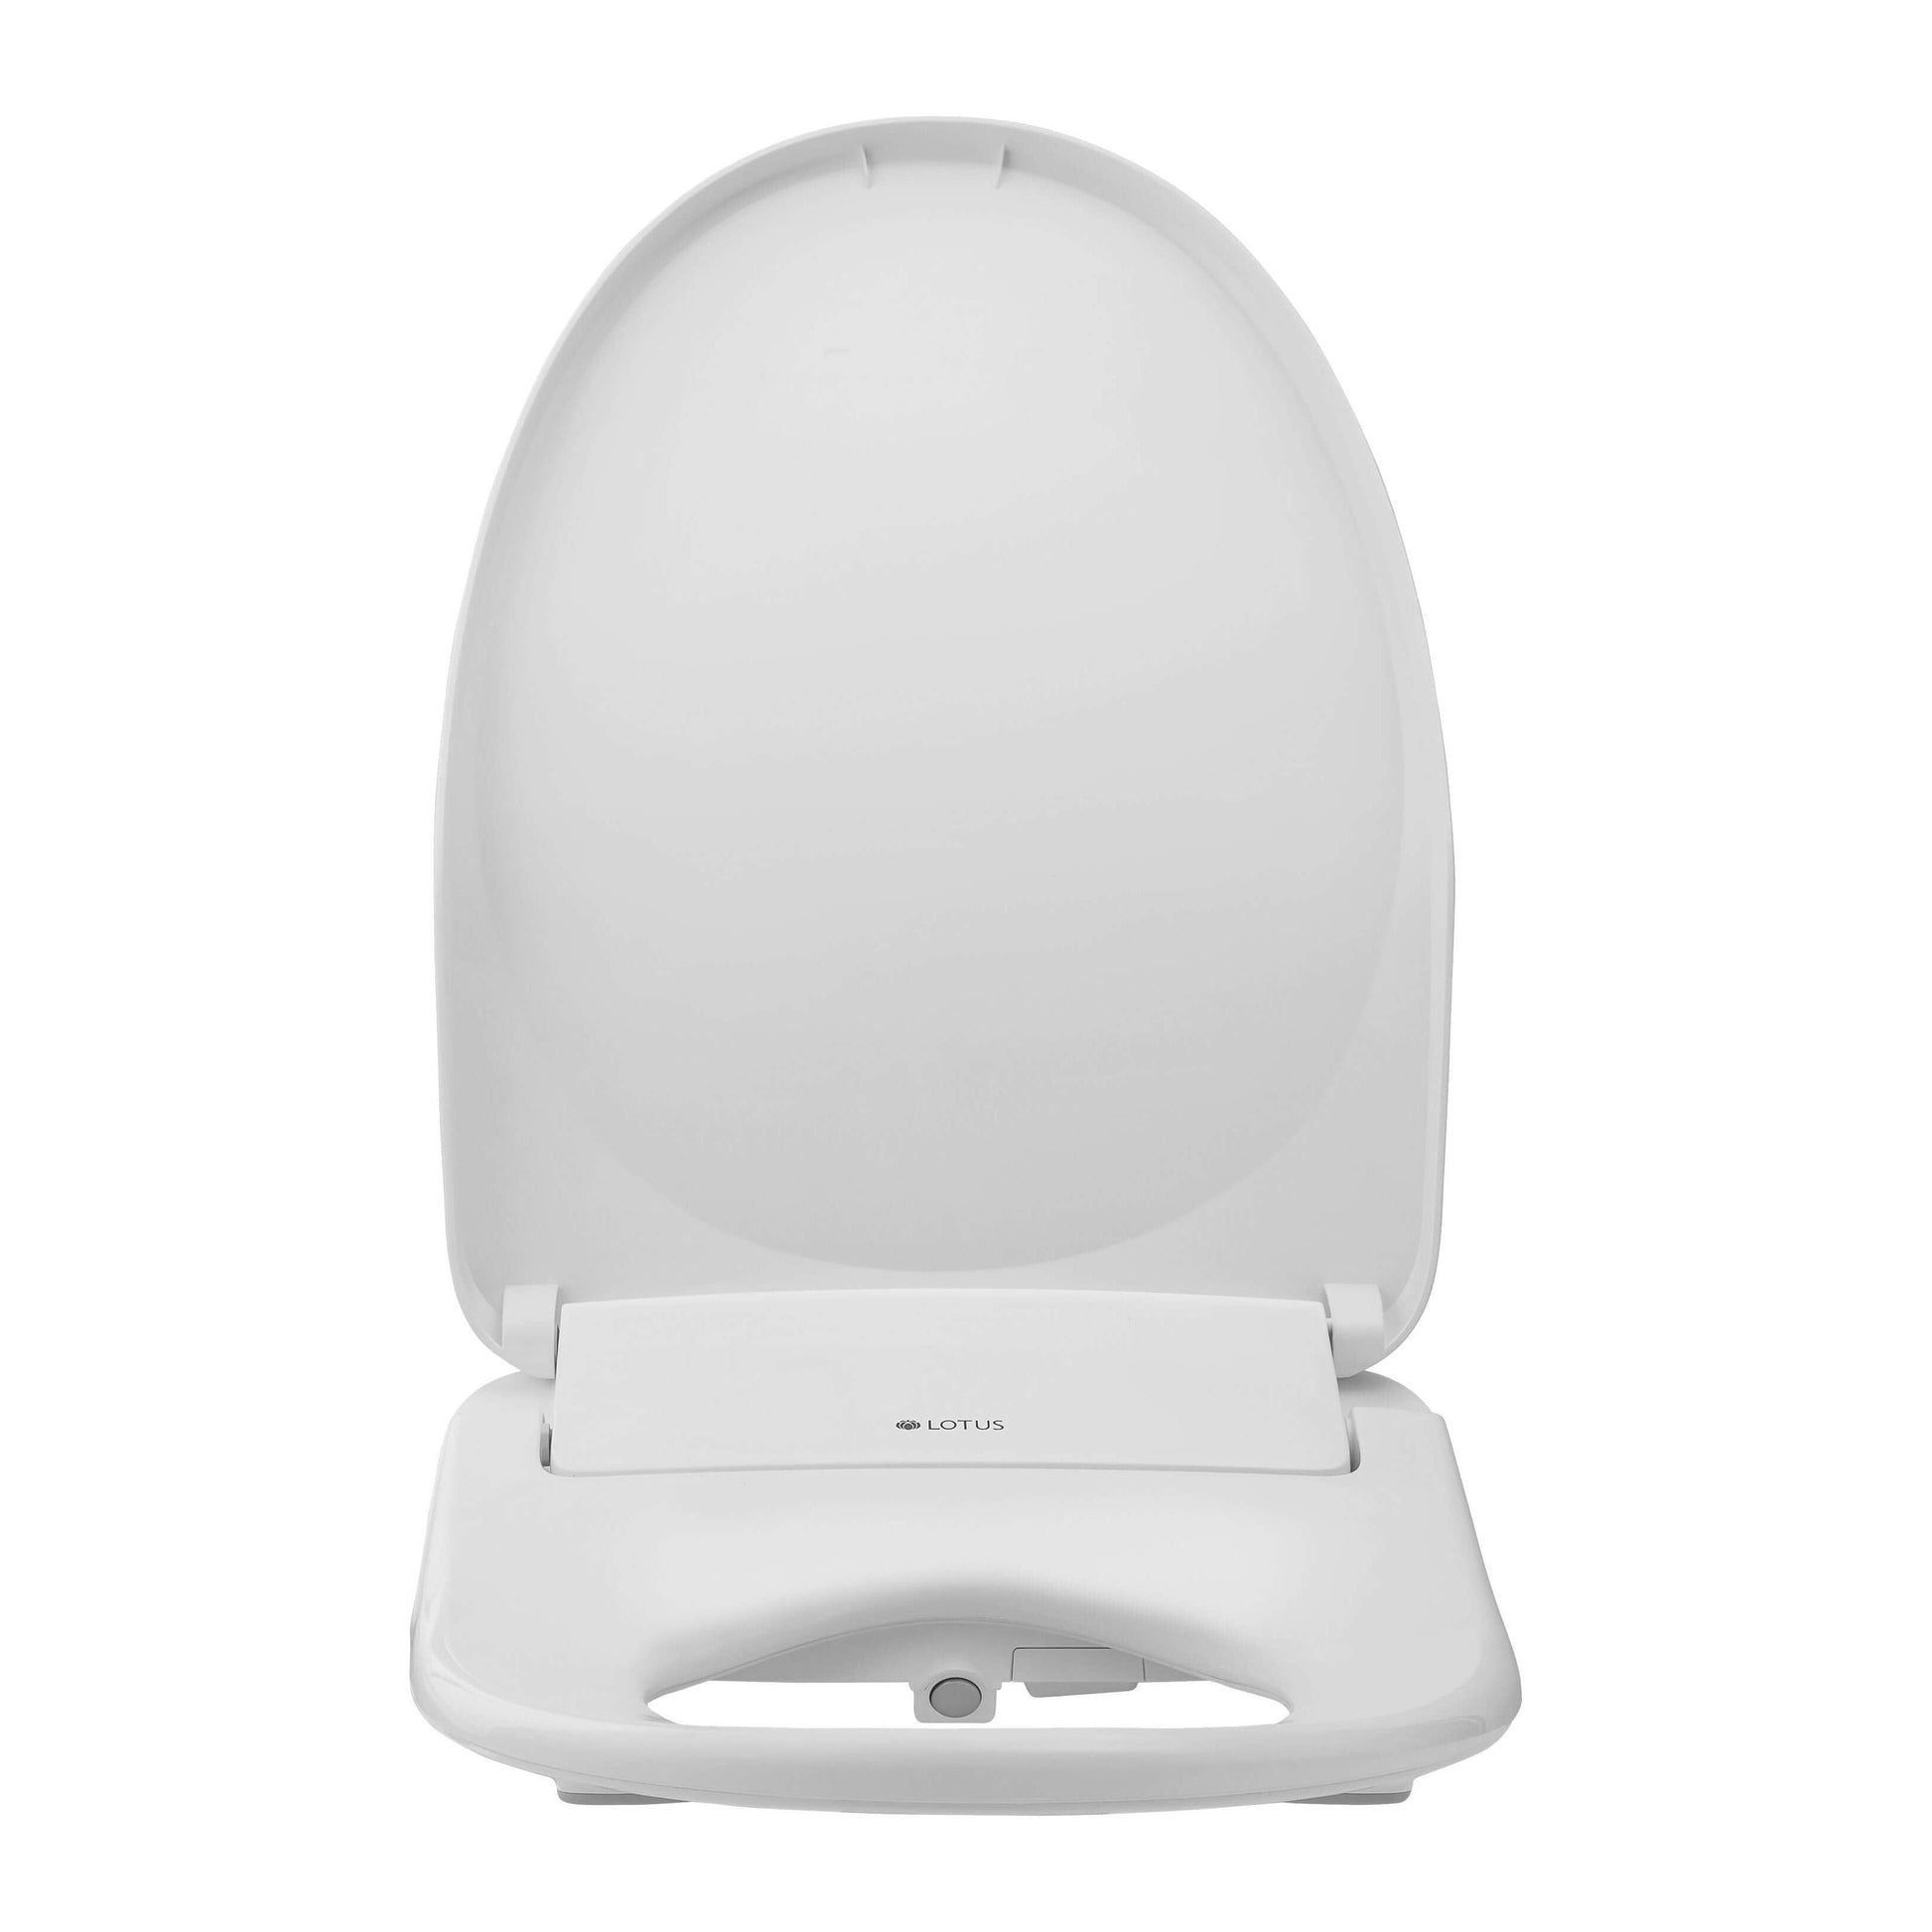 Lotus Bidet Seat ATS-850 - front view with lid open